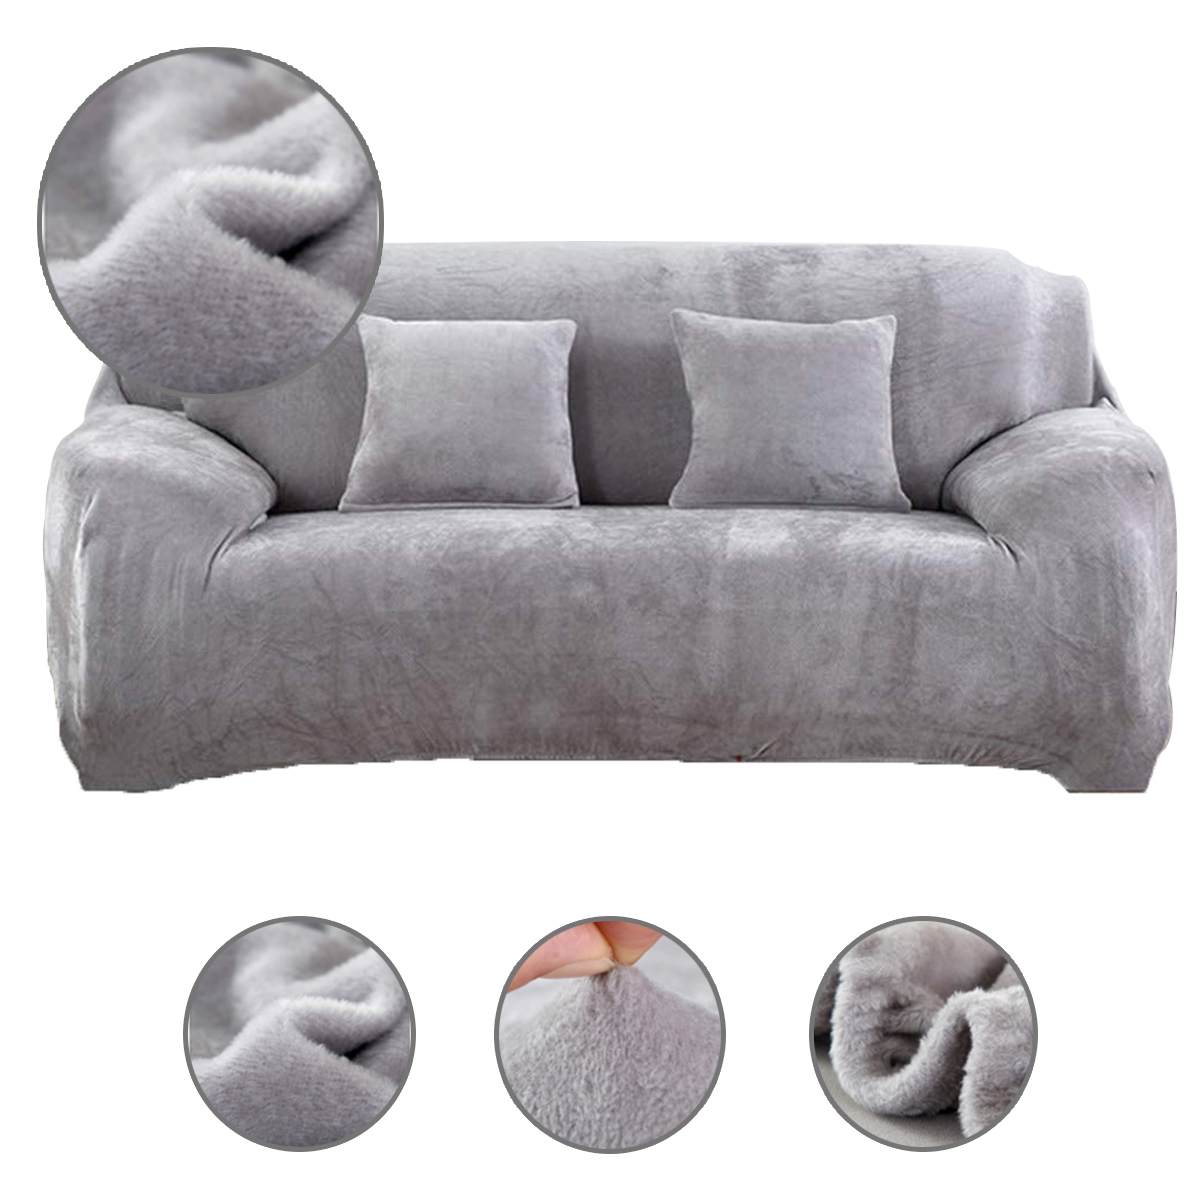 1/2/3 Seater Solid Color Plush Thicken Elastic Sofa Cover Living Room Universal Sectional Stretch Furniture Couch Slipcover